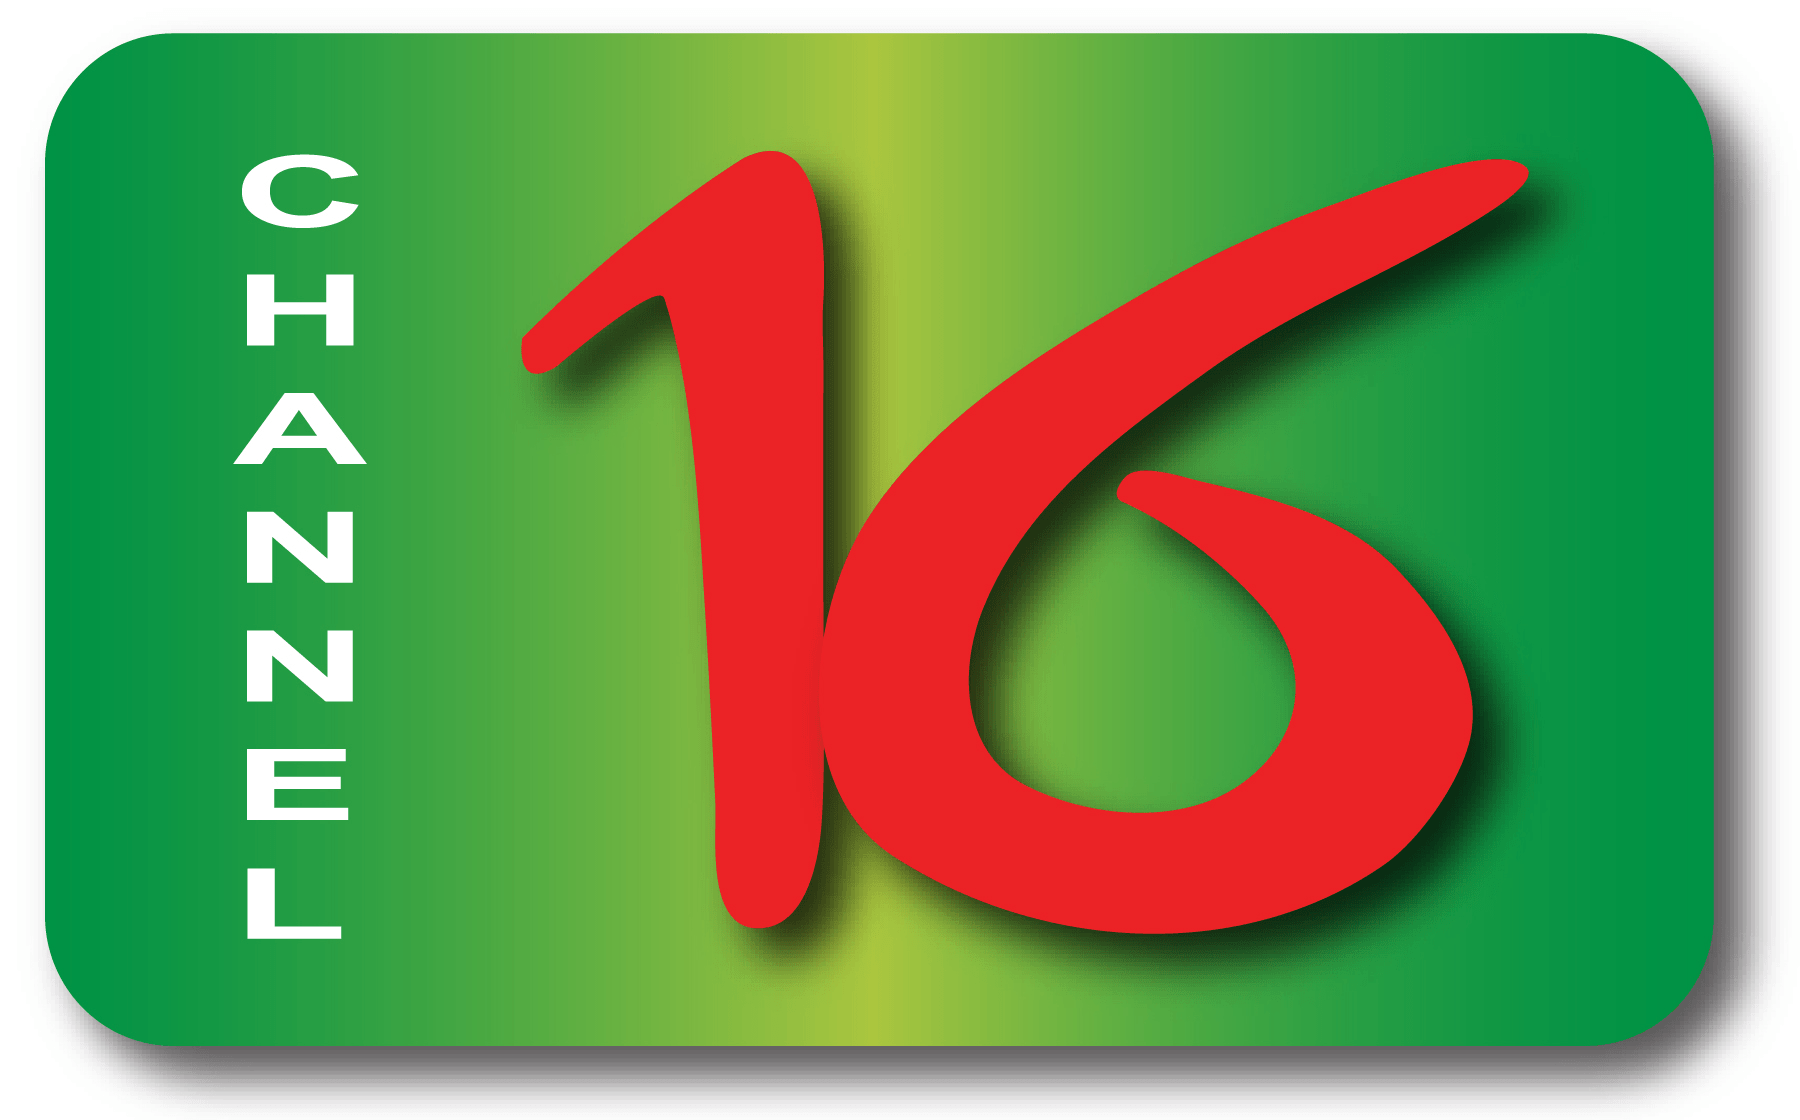 16 Logo - Channel 16 bd.png